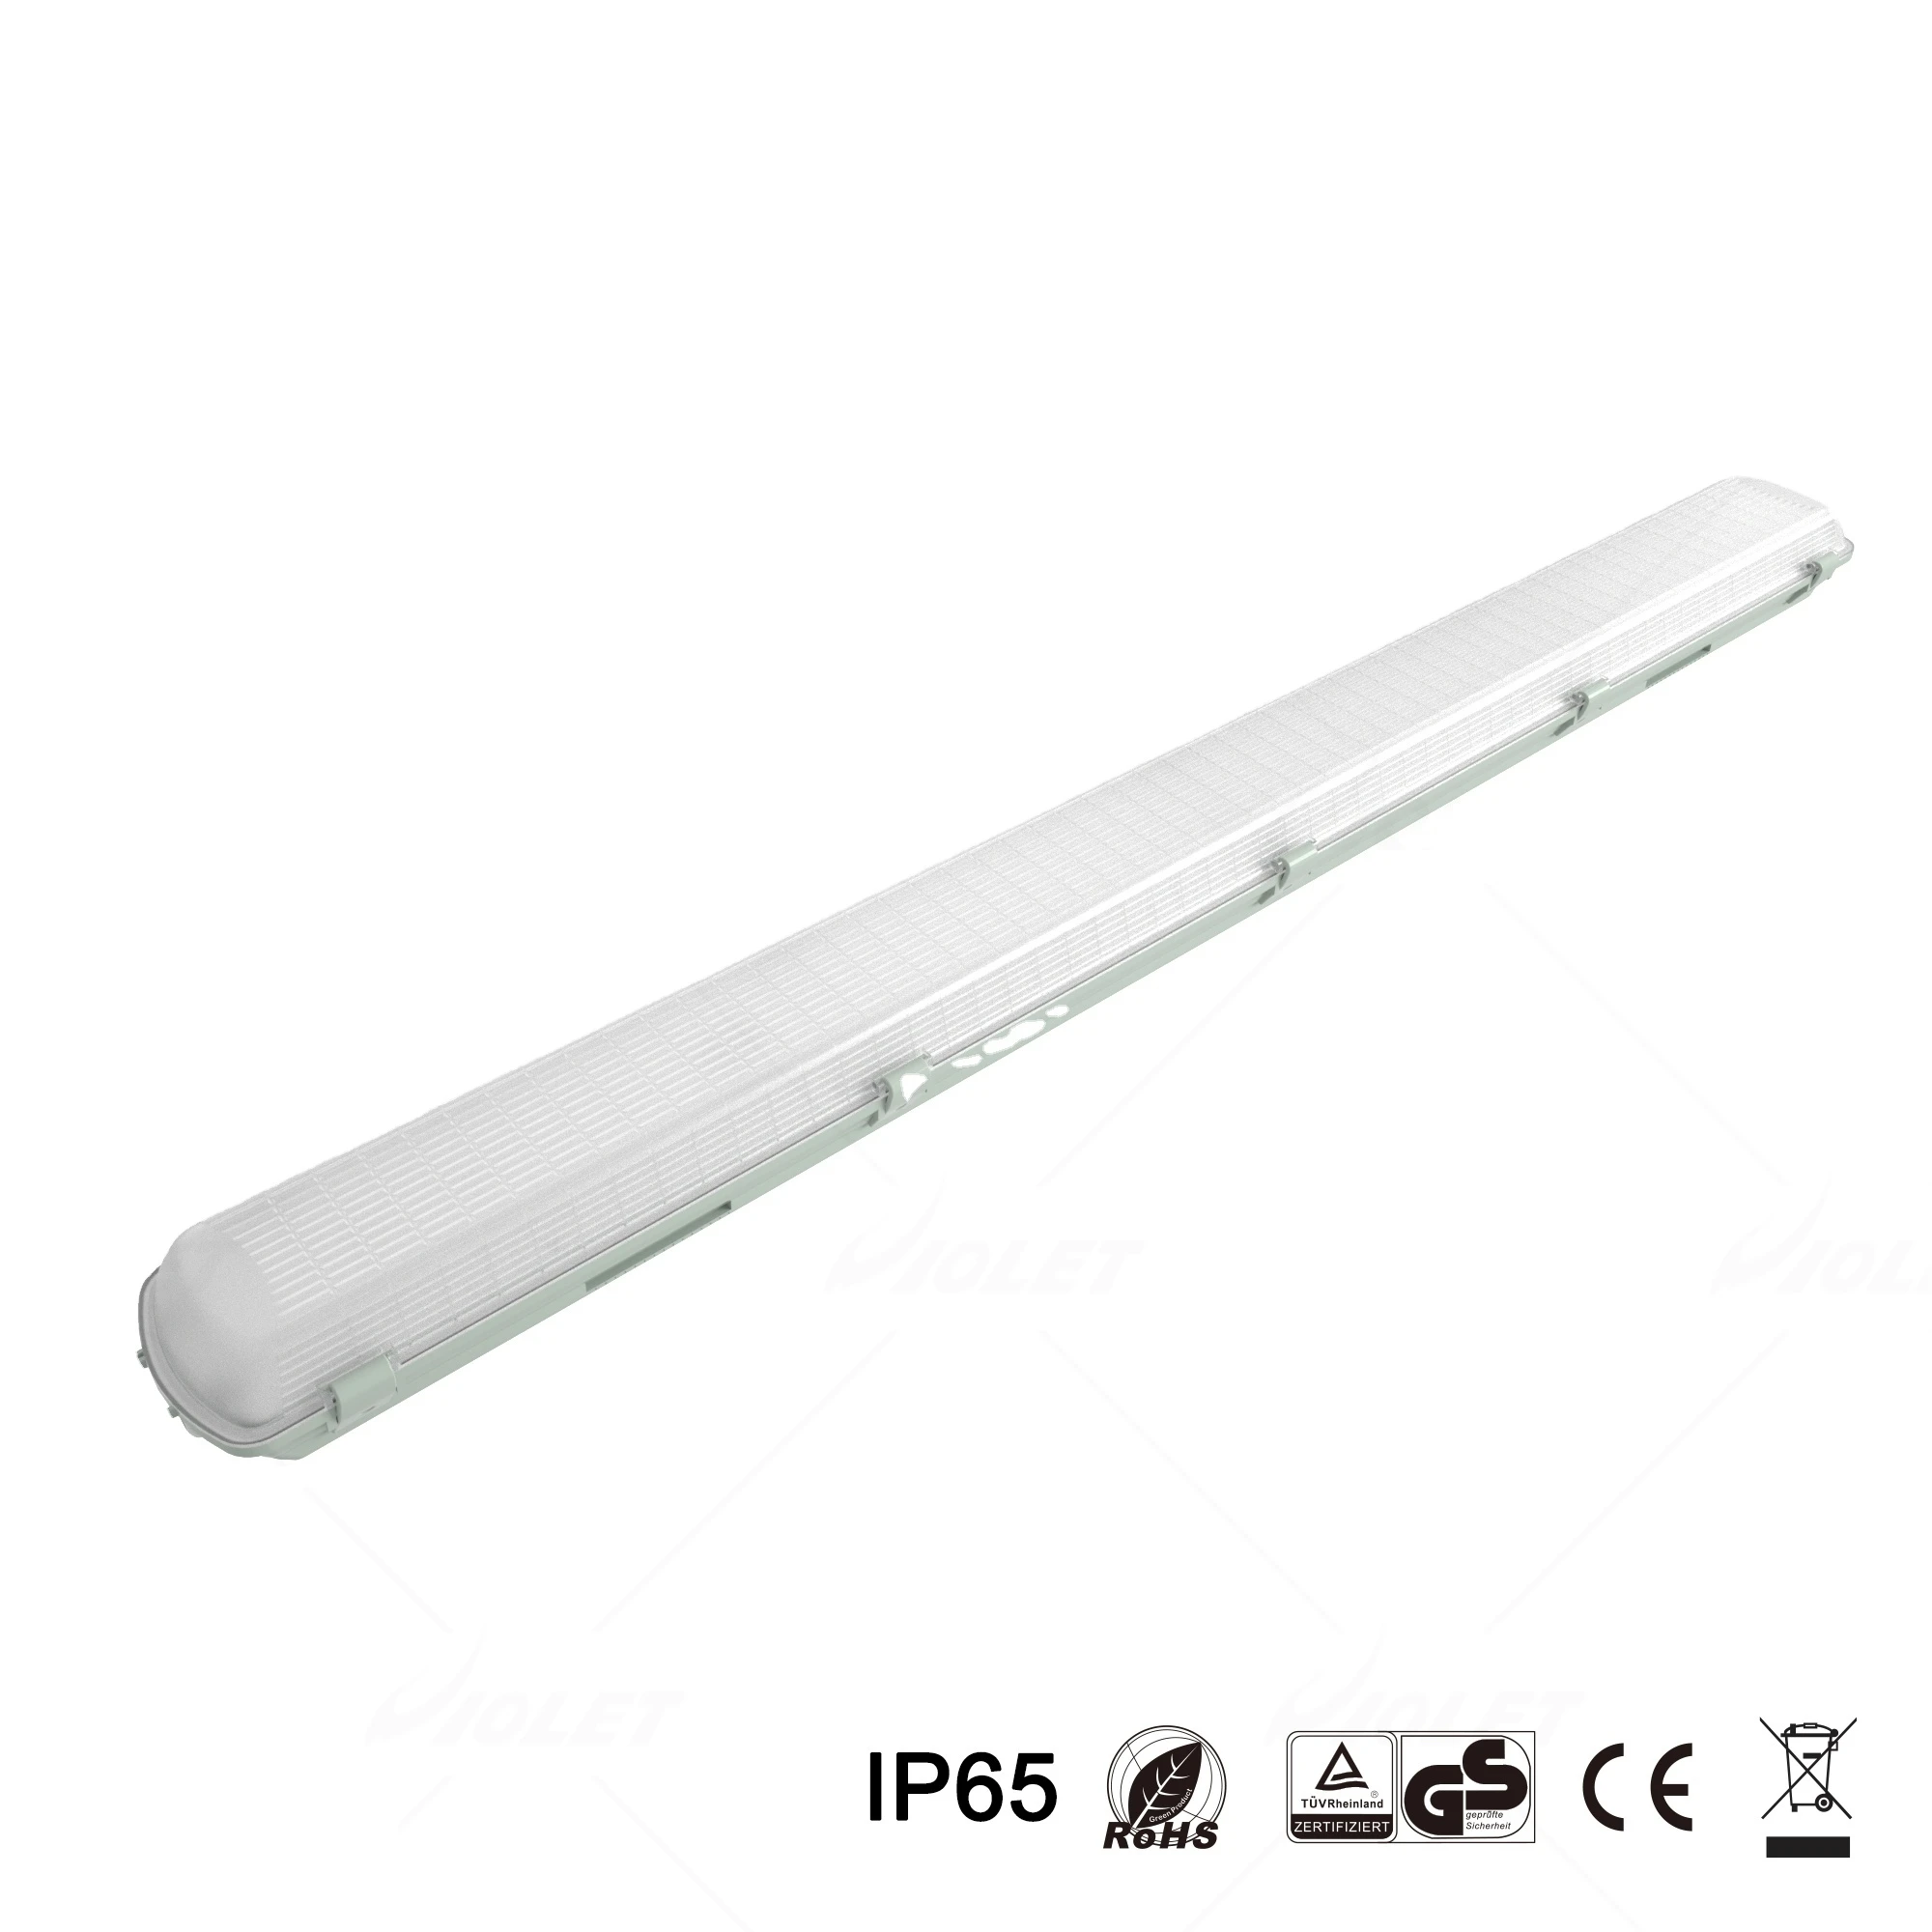 IP65 IK08 LED Waterproof Lighting as Replacement Traditional T5 Fluorescent Lamp